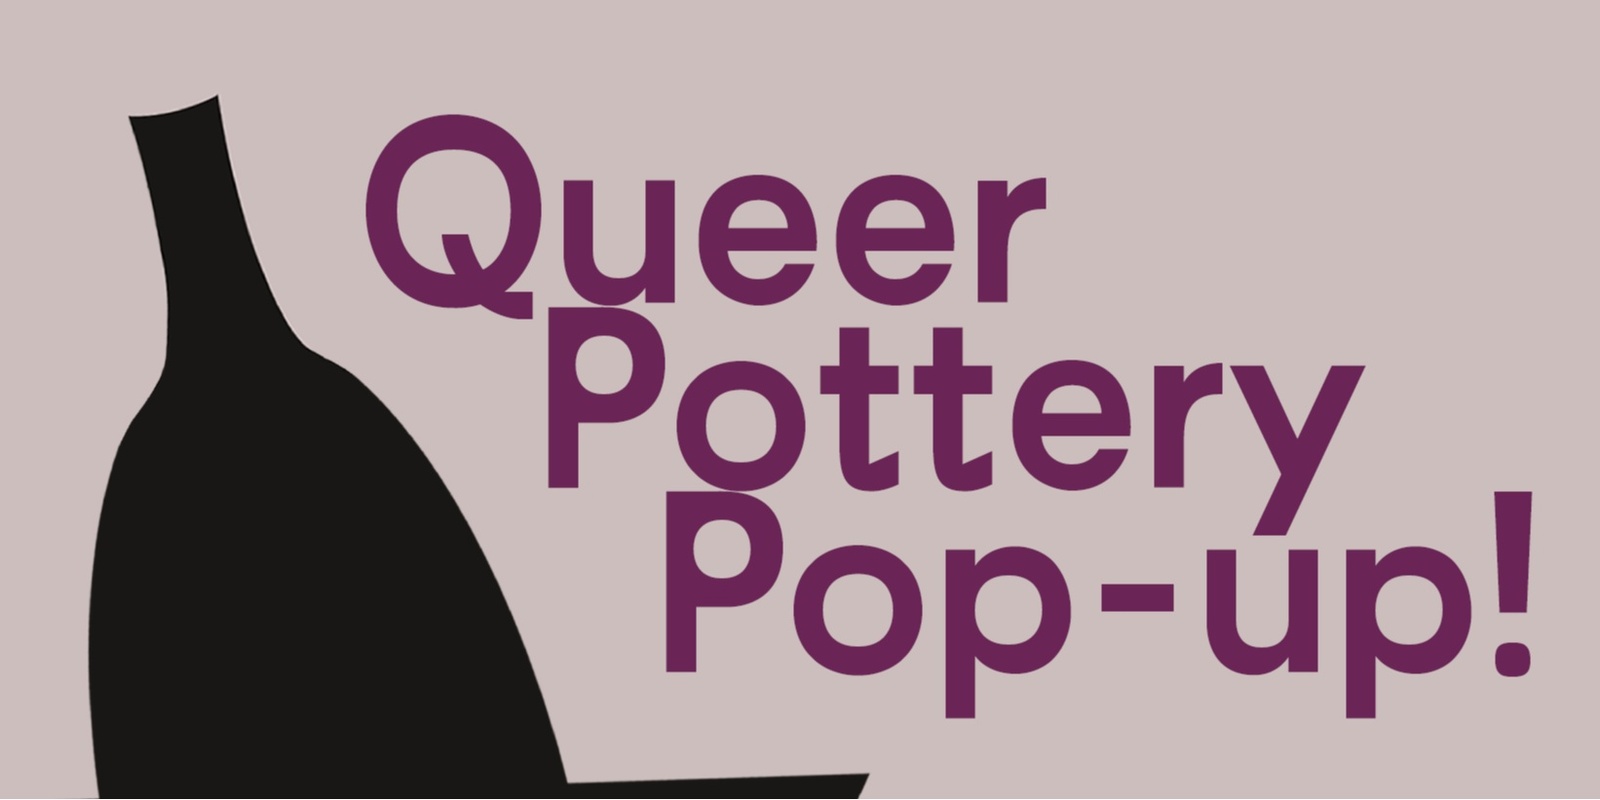 Banner image for Queer Pottery Pop-Up